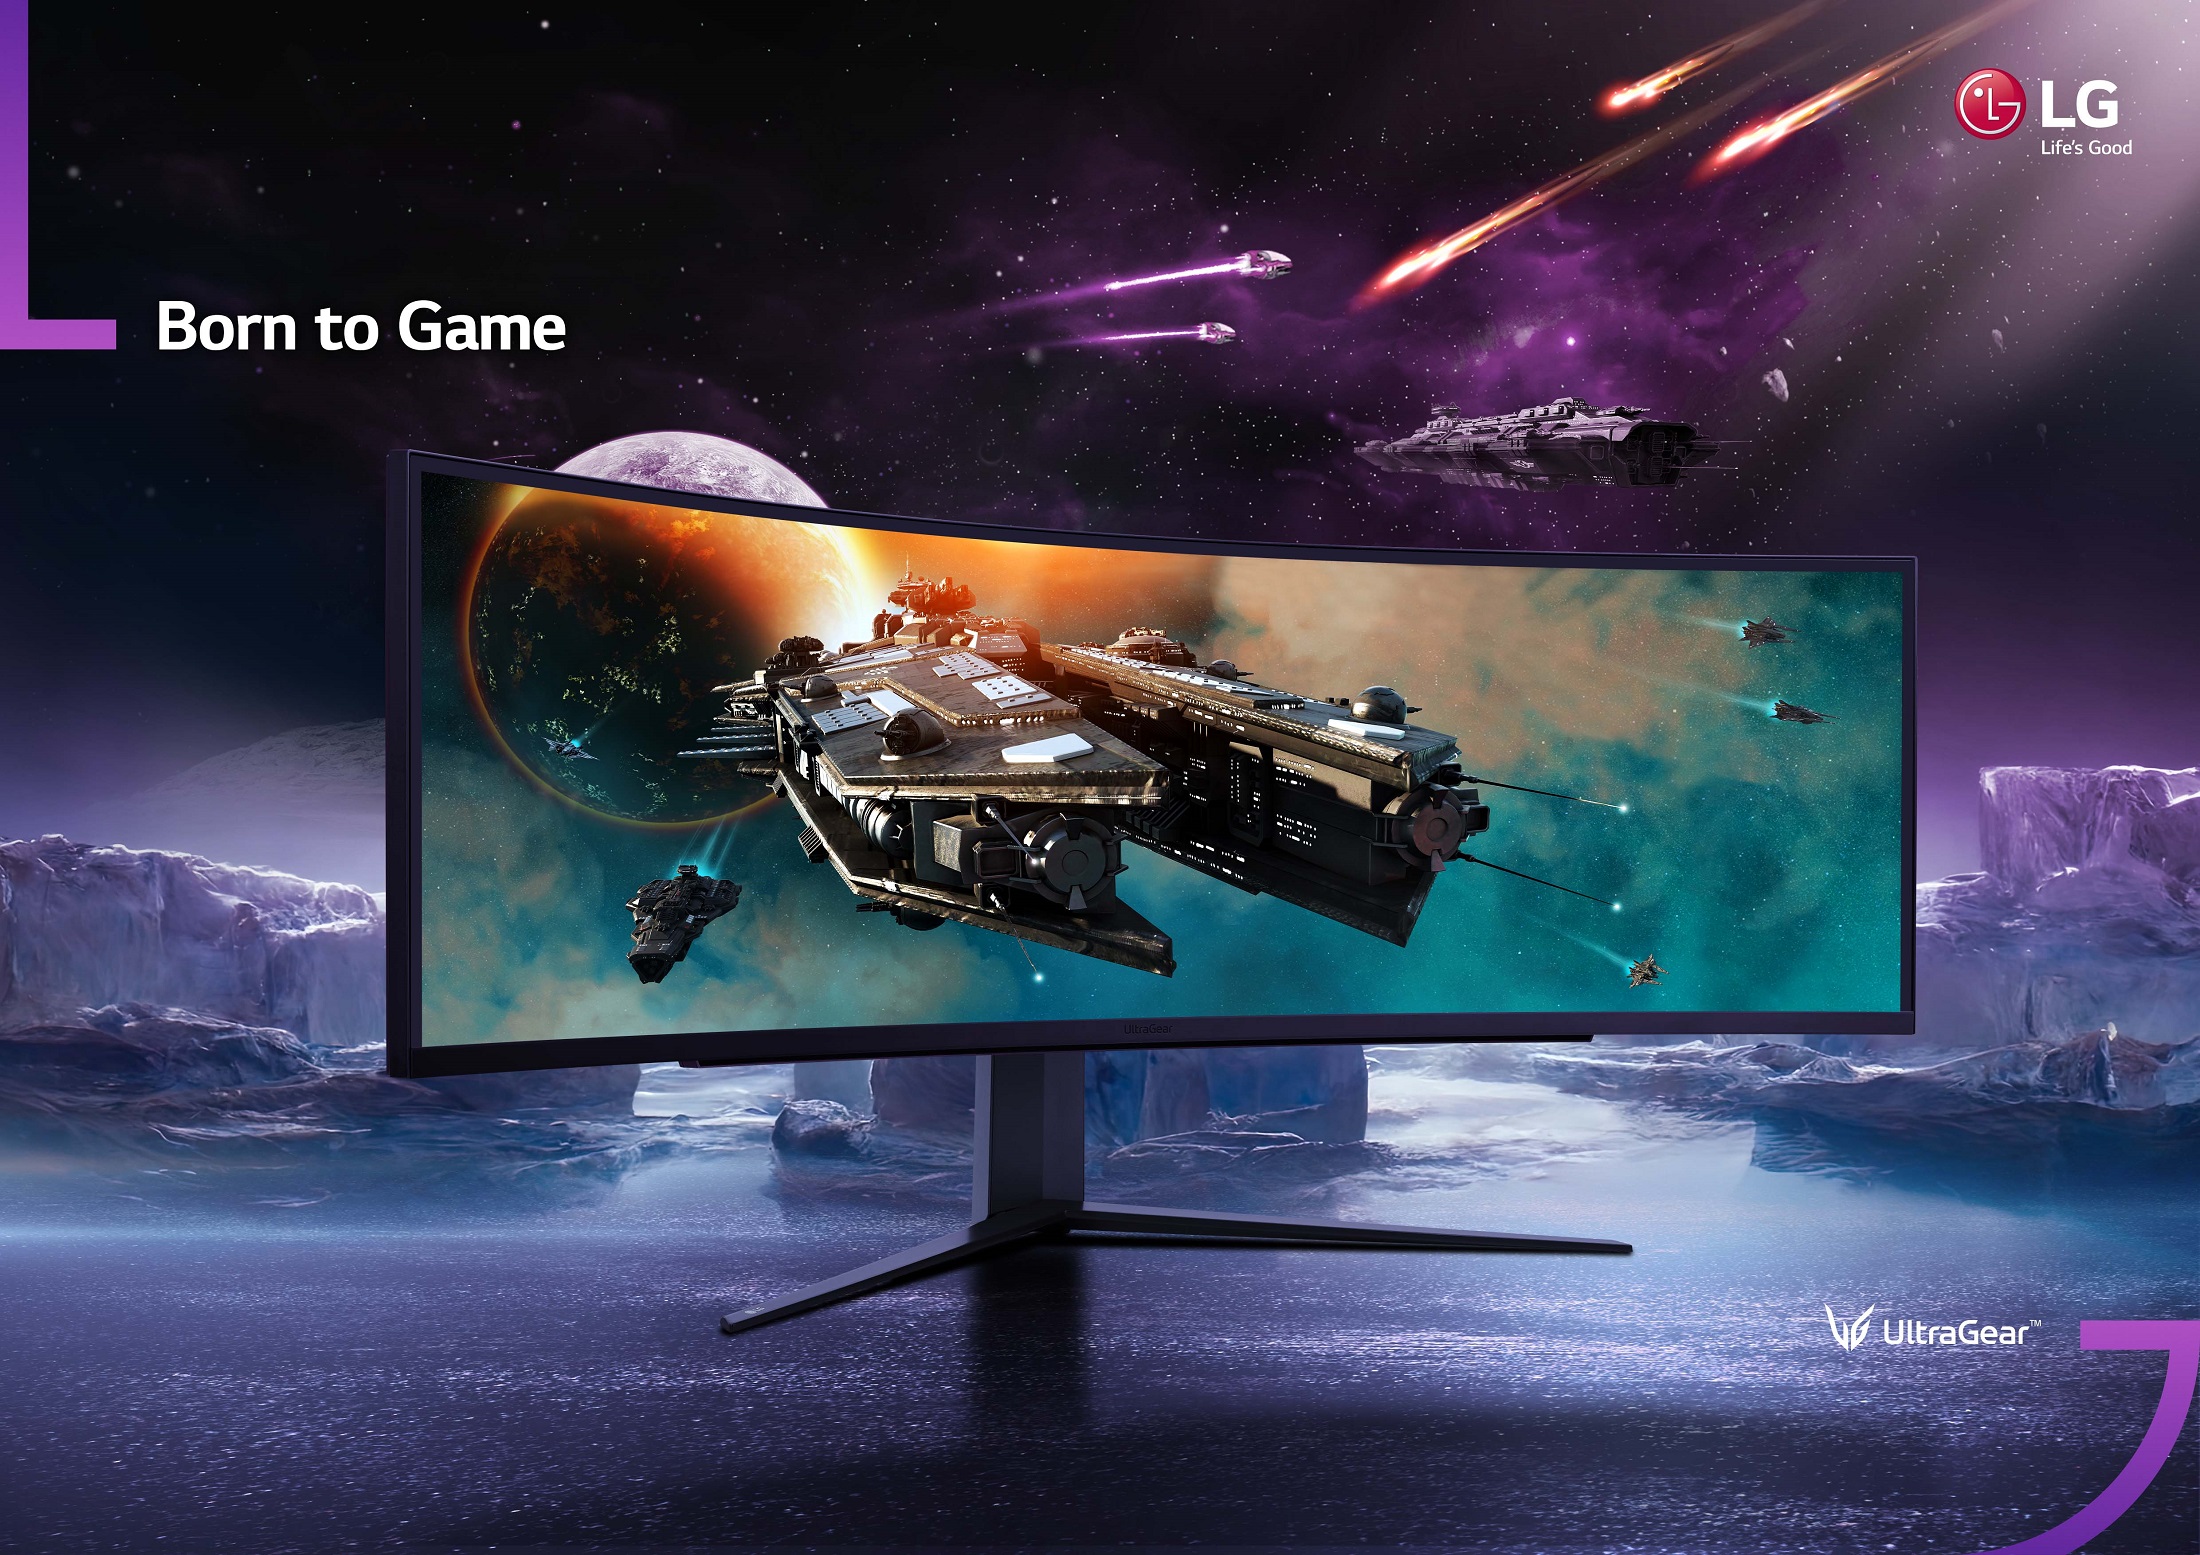 The Lg Ultragear Monitor Elevates Immersive Gaming With Its 49 Inch, 32:9 Aspect Ratio Screen